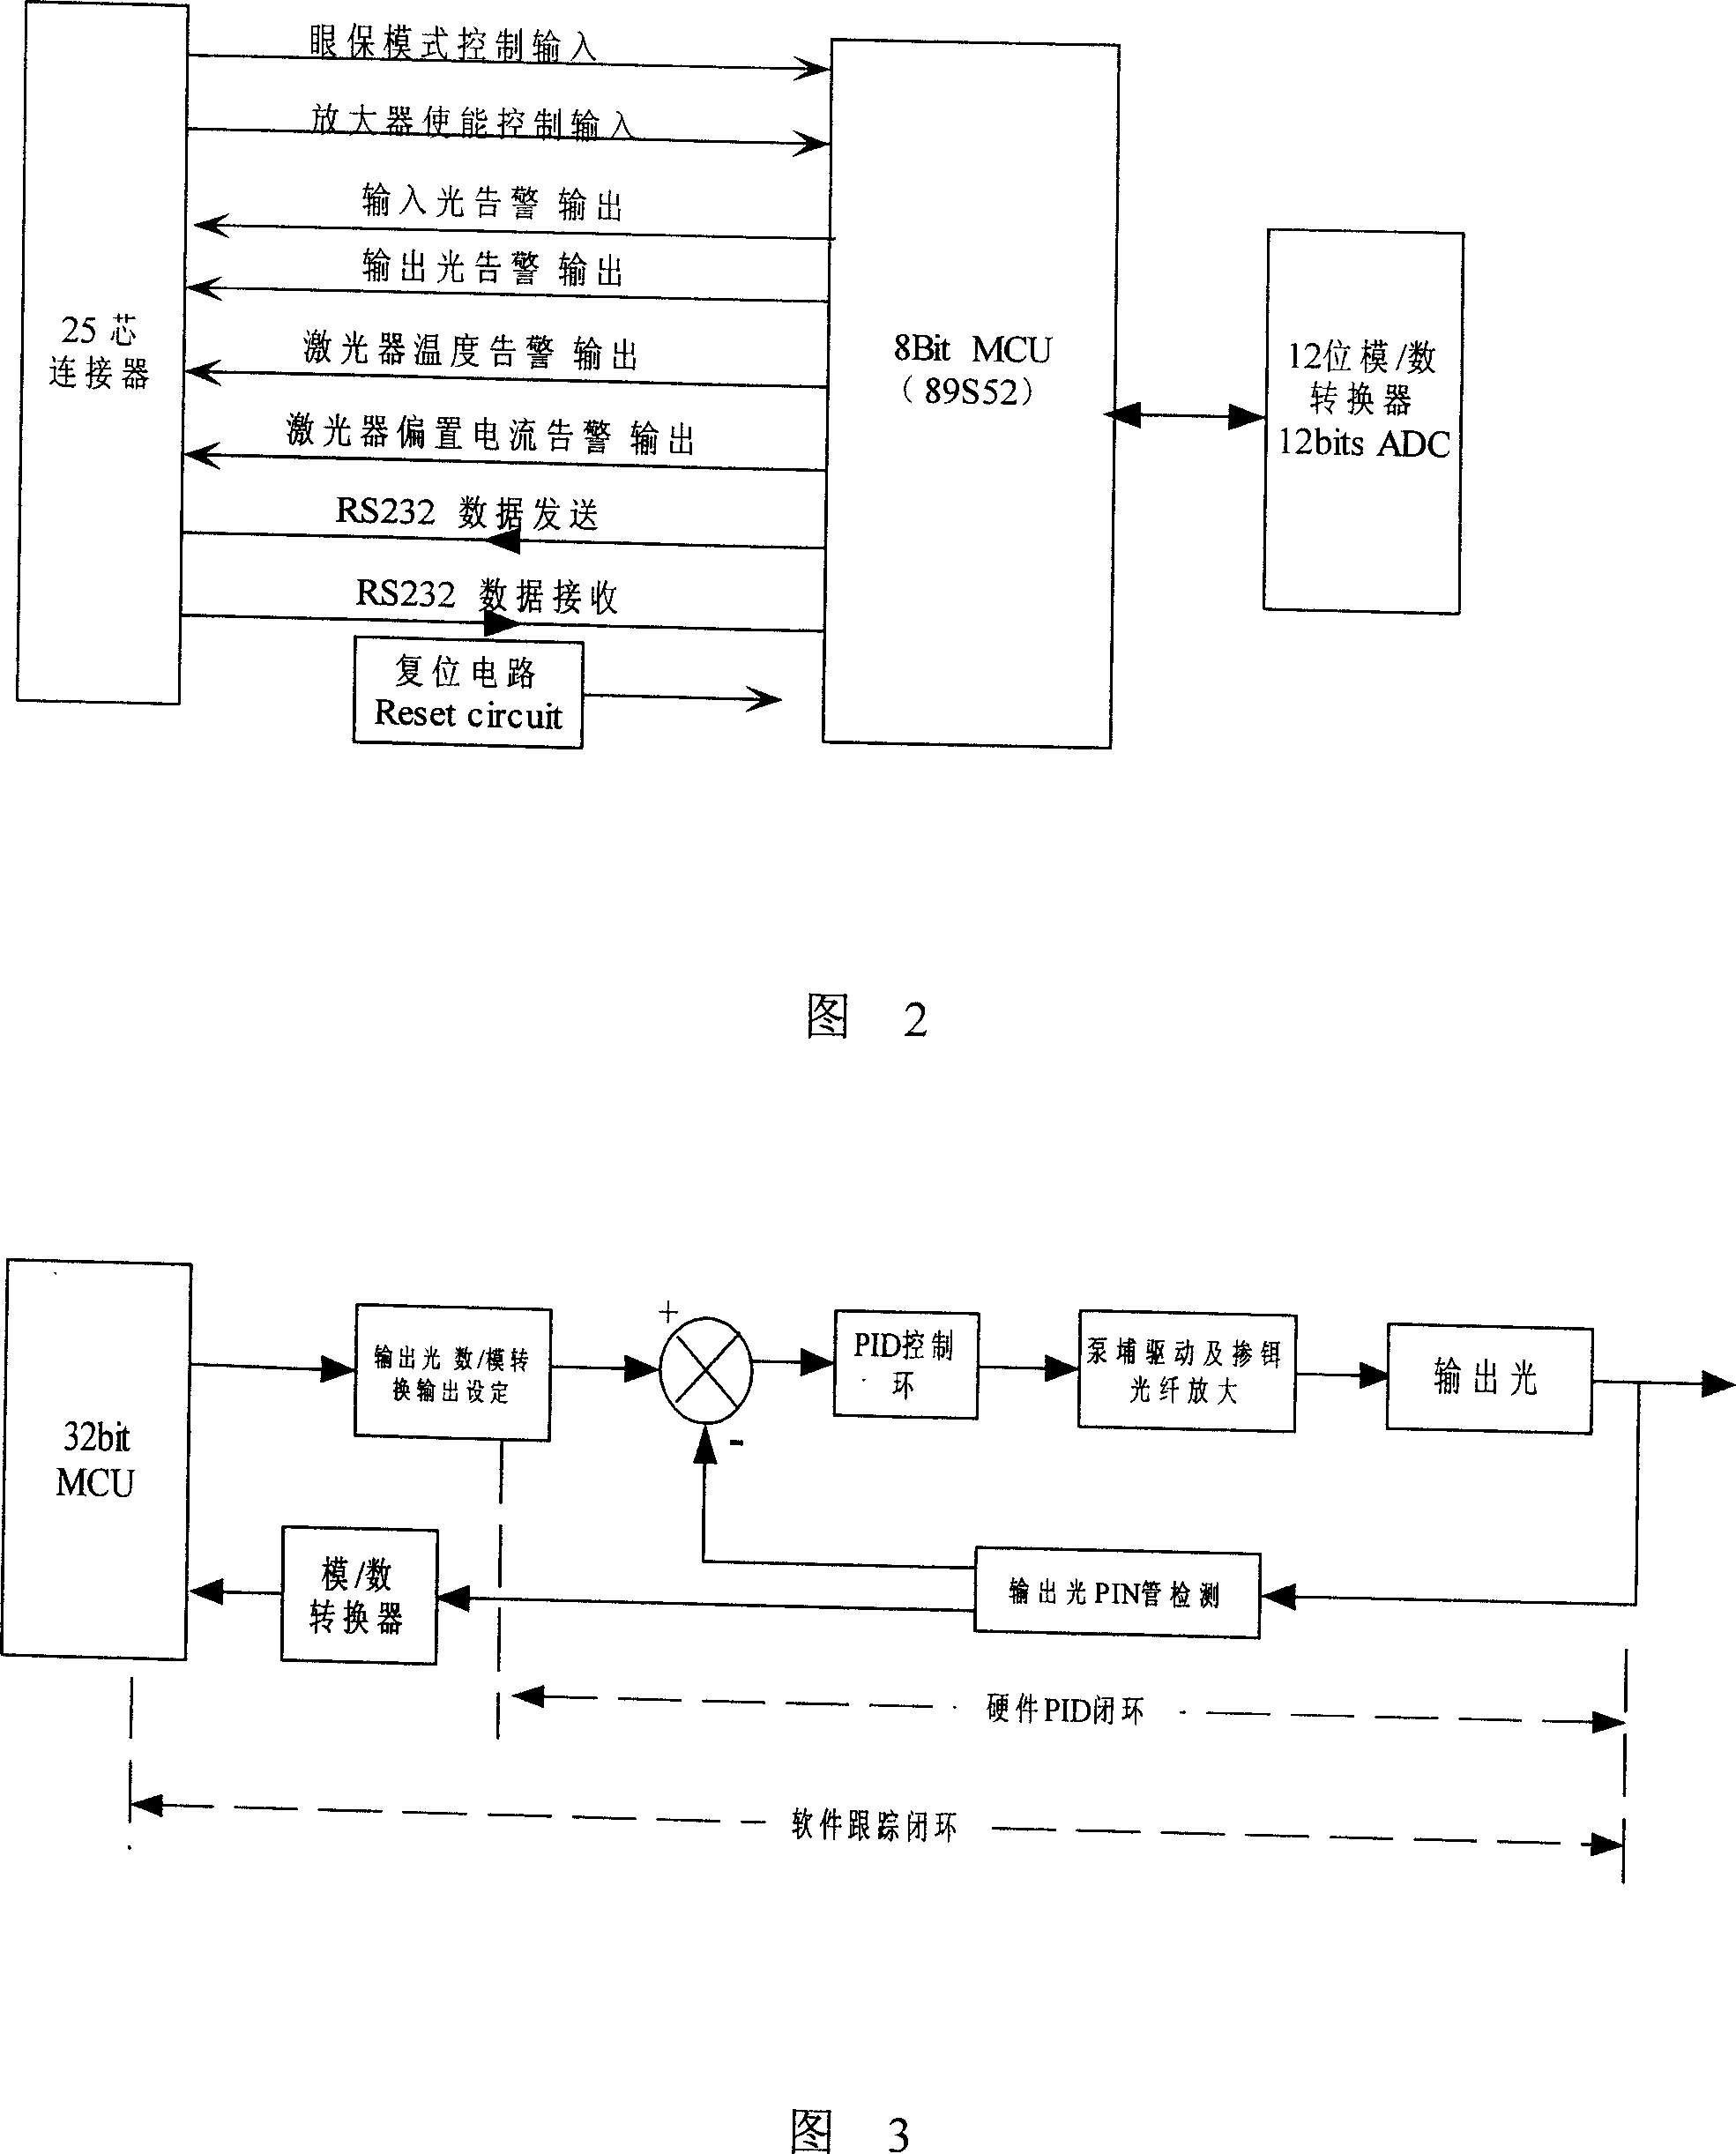 Control device for the optical amplifier